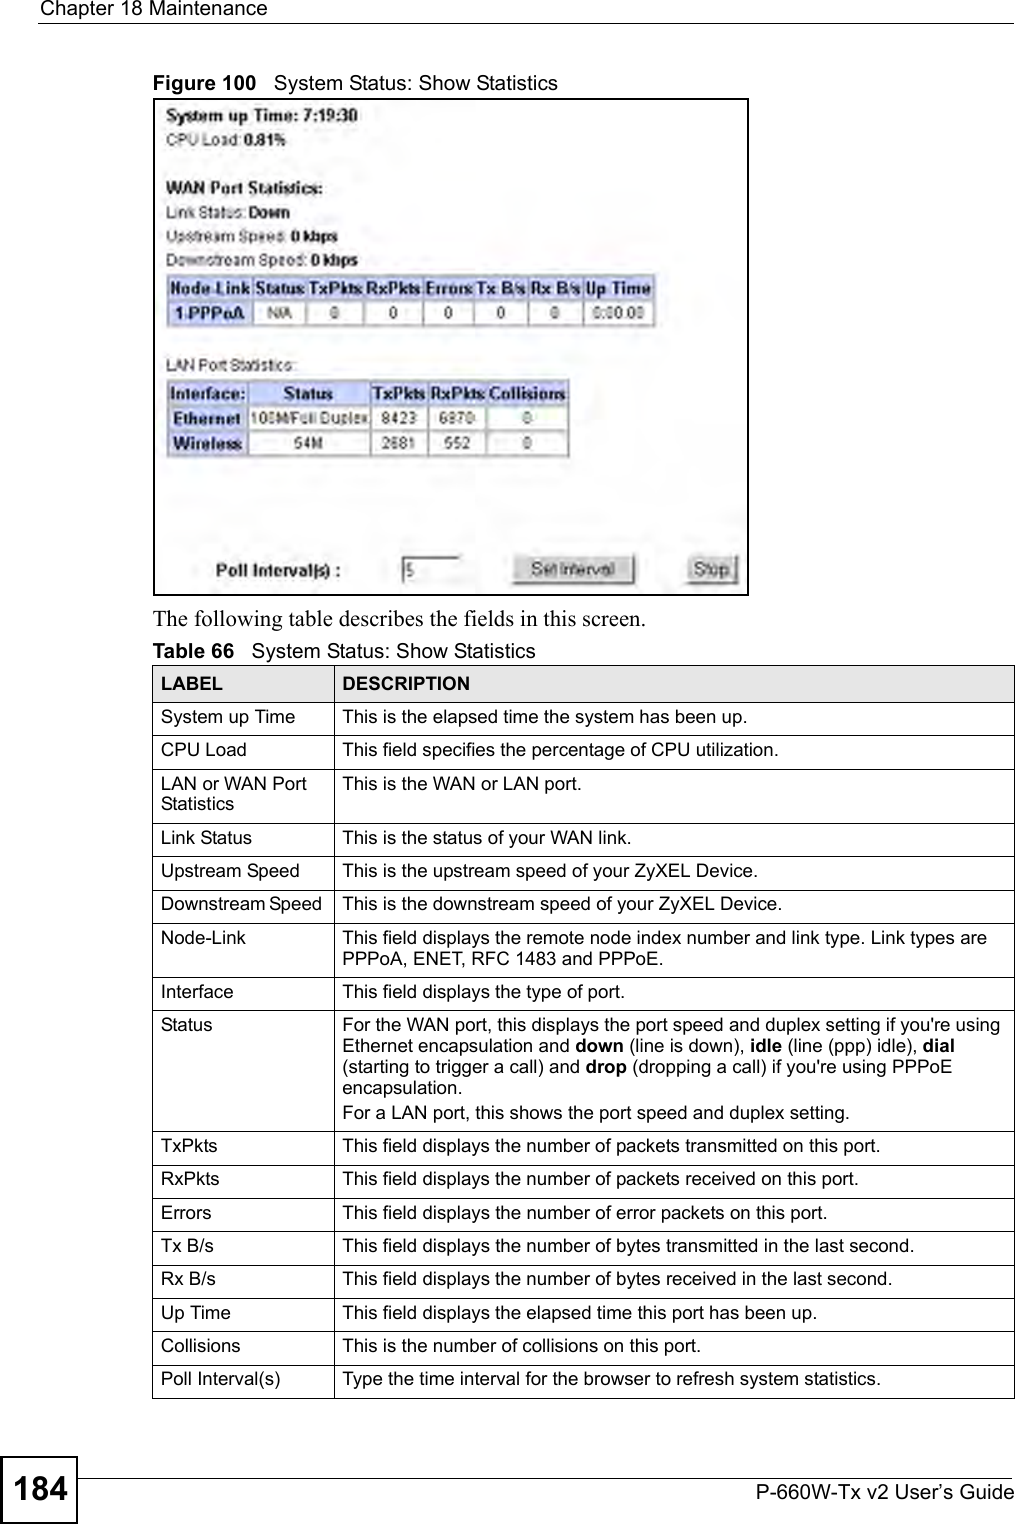 Chapter 18 MaintenanceP-660W-Tx v2 User’s Guide184Figure 100   System Status: Show StatisticsThe following table describes the fields in this screen.  Table 66   System Status: Show StatisticsLABEL DESCRIPTIONSystem up Time This is the elapsed time the system has been up.CPU Load This field specifies the percentage of CPU utilization.LAN or WAN Port StatisticsThis is the WAN or LAN port.Link Status This is the status of your WAN link.Upstream Speed This is the upstream speed of your ZyXEL Device.Downstream Speed  This is the downstream speed of your ZyXEL Device.Node-Link This field displays the remote node index number and link type. Link types are PPPoA, ENET, RFC 1483 and PPPoE.Interface This field displays the type of port.Status  For the WAN port, this displays the port speed and duplex setting if you&apos;re using Ethernet encapsulation and down (line is down), idle (line (ppp) idle), dial (starting to trigger a call) and drop (dropping a call) if you&apos;re using PPPoE encapsulation.For a LAN port, this shows the port speed and duplex setting.TxPkts  This field displays the number of packets transmitted on this port.RxPkts  This field displays the number of packets received on this port.Errors This field displays the number of error packets on this port. Tx B/s  This field displays the number of bytes transmitted in the last second.Rx B/s This field displays the number of bytes received in the last second.Up Time  This field displays the elapsed time this port has been up. Collisions This is the number of collisions on this port.Poll Interval(s) Type the time interval for the browser to refresh system statistics.